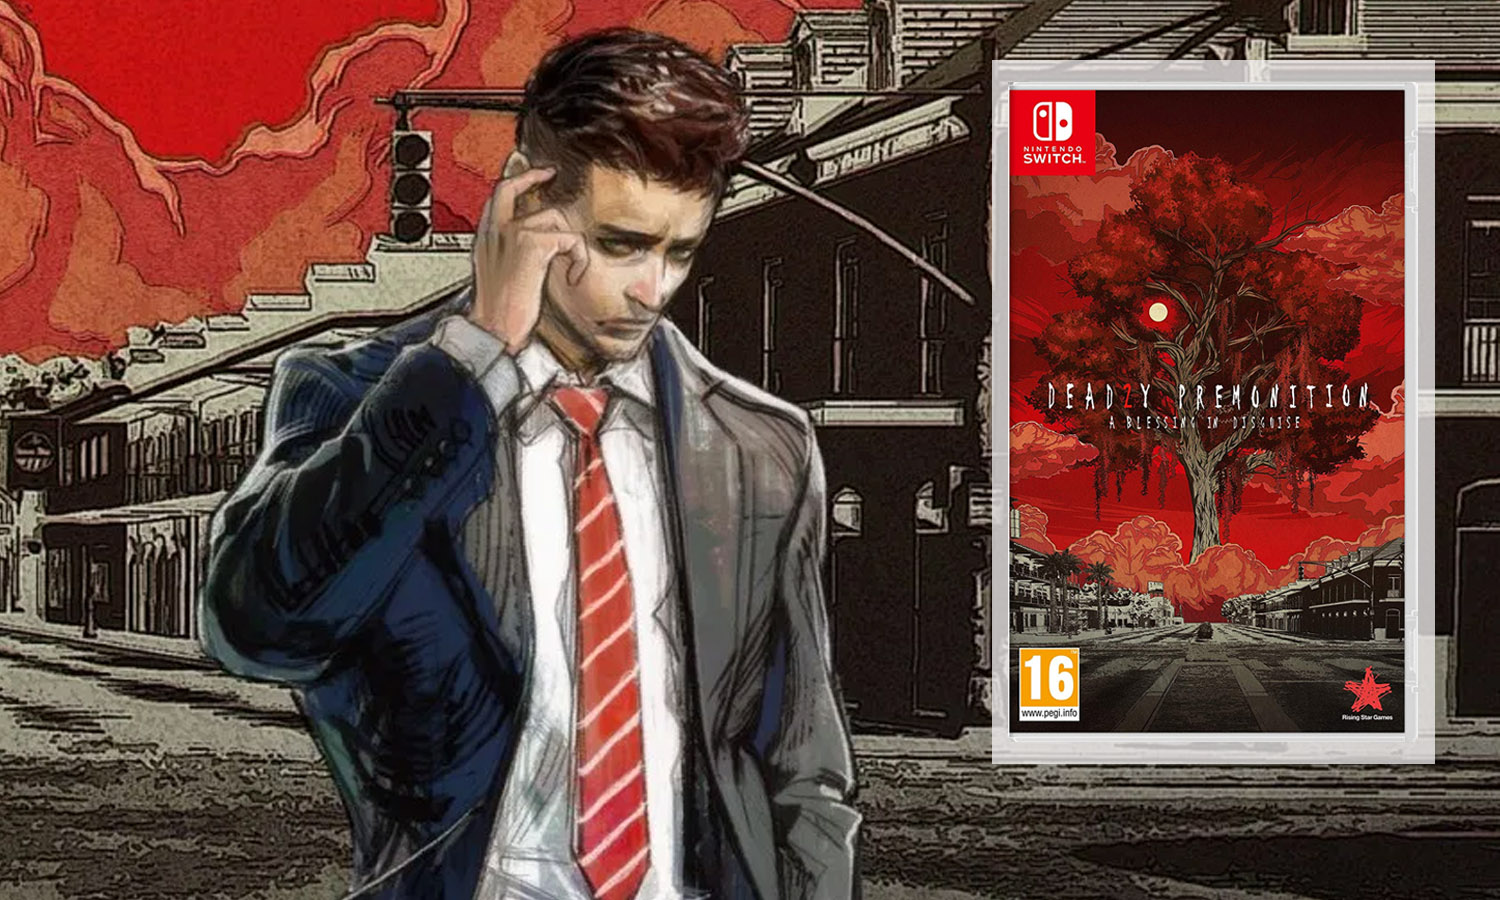 free download switch deadly premonition 2